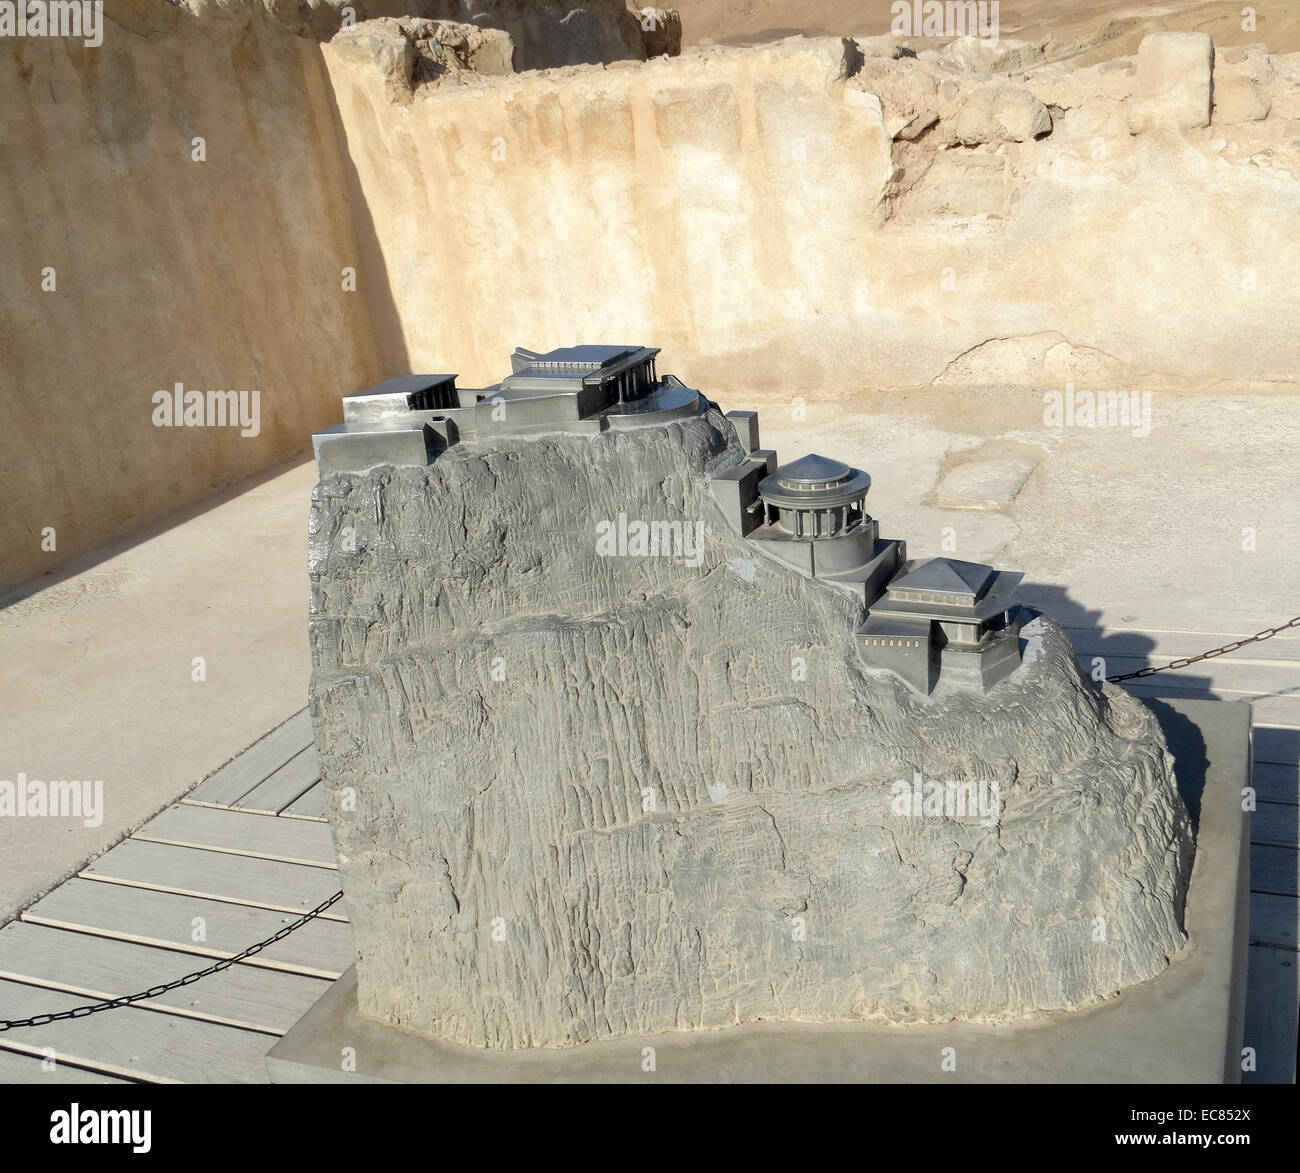 Model; Northern Palace of Masada; an ancient fortification in the Southern District of Israel situated on top of an isolated rock plateau on the edge of the Judean Desert; overlooking the Dead Sea. Herod the Great built palaces for himself on the mountain and fortified Masada between 37 and 31 BCE. Stock Photo